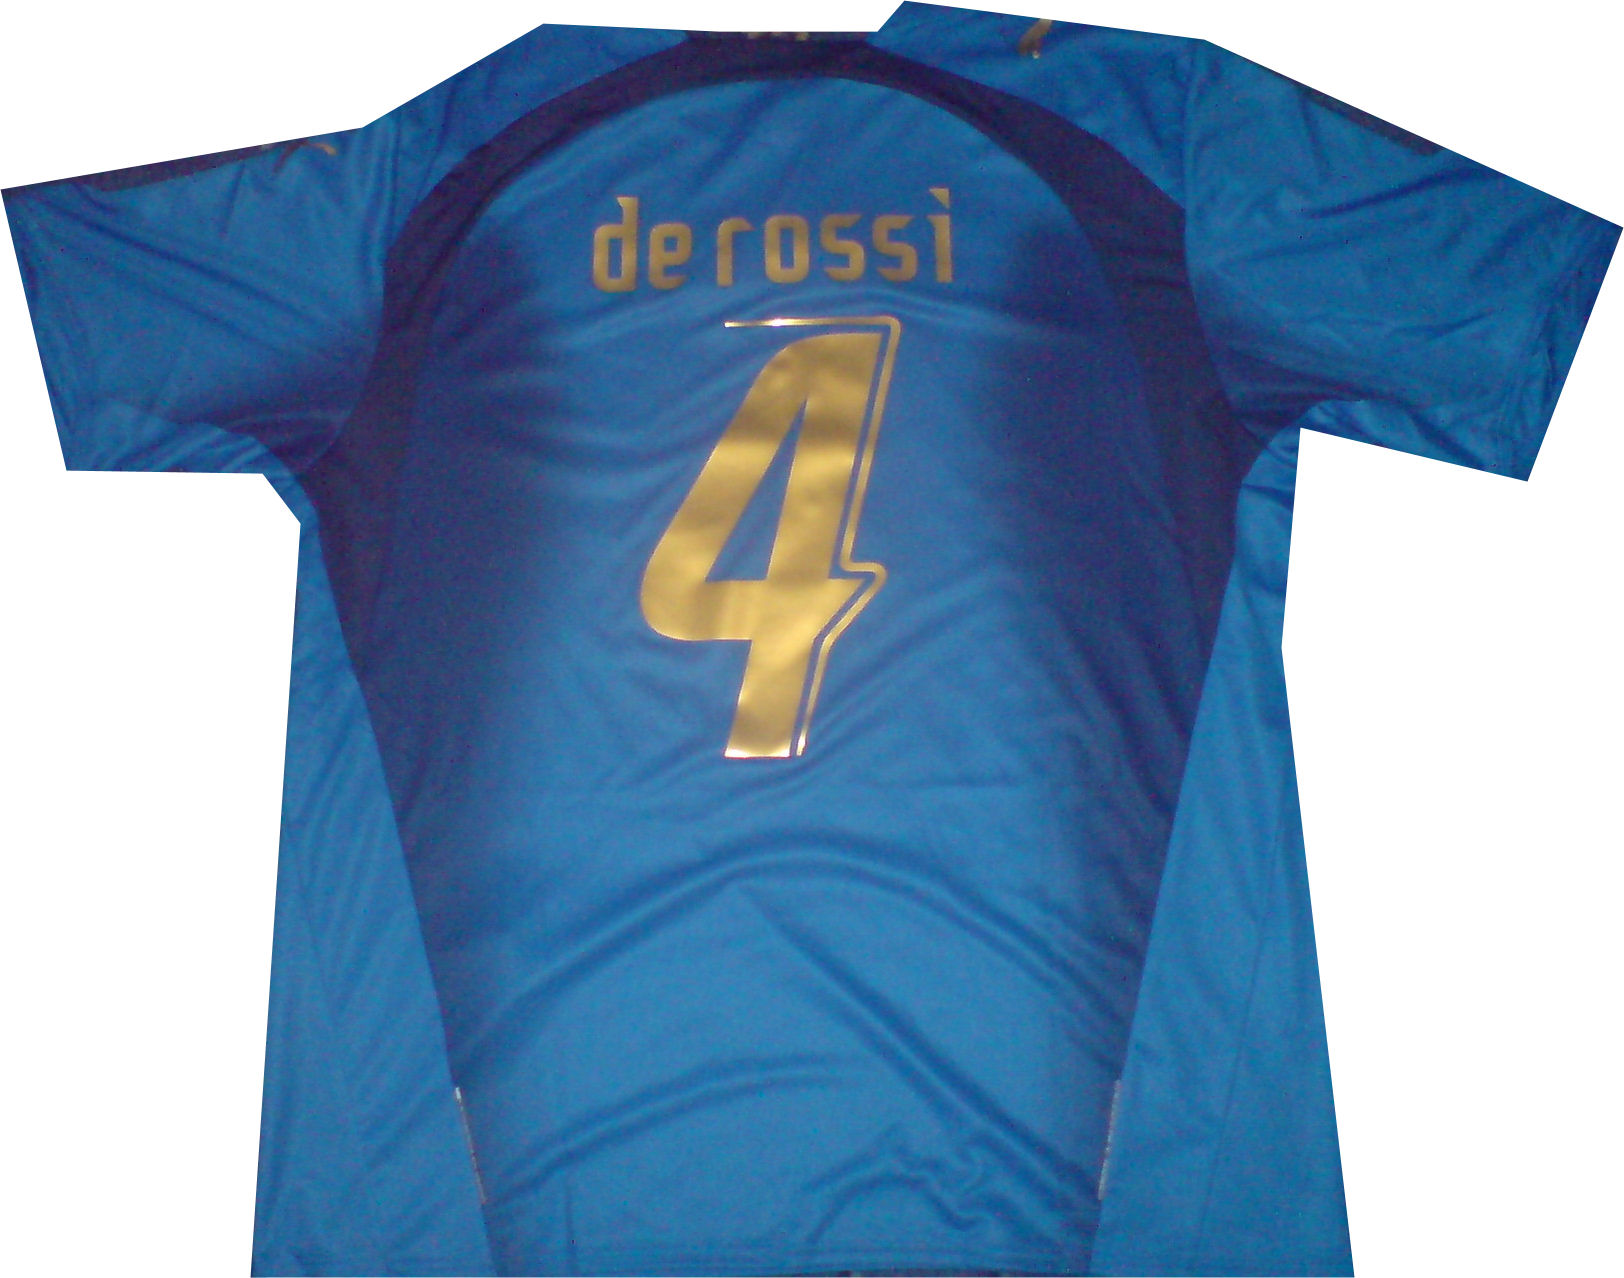 Official 06-07 Italy home football shirt with authentic